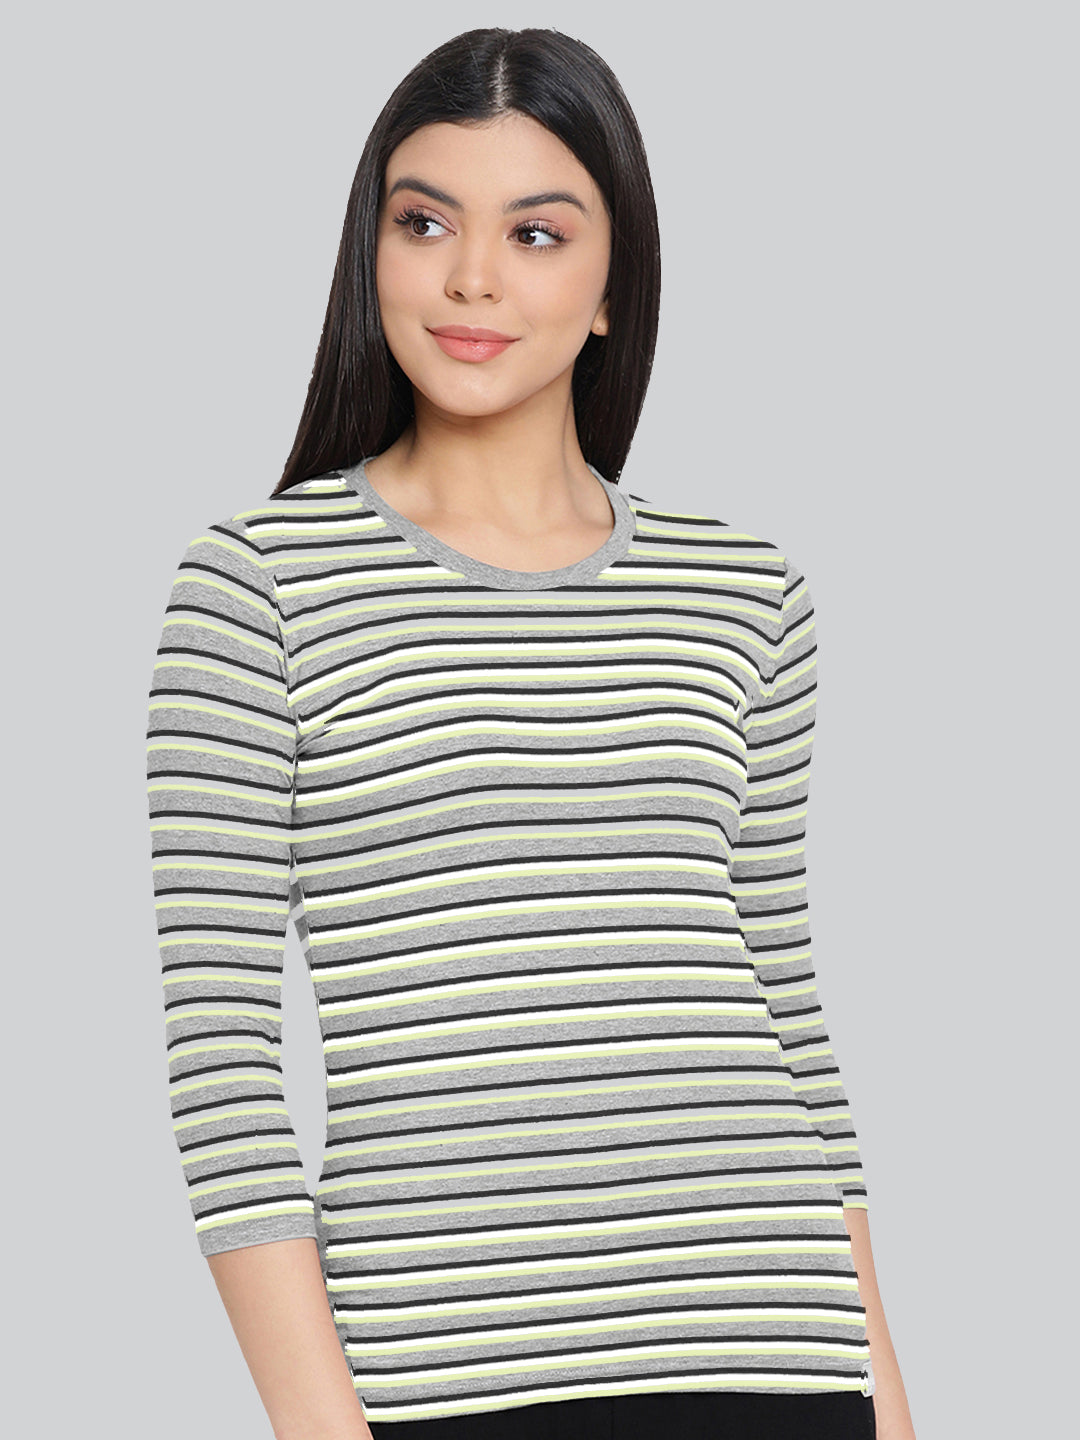 Grey Base with Black and White Stripes Round Neck 3/4 Sleeve T-Shirt #408